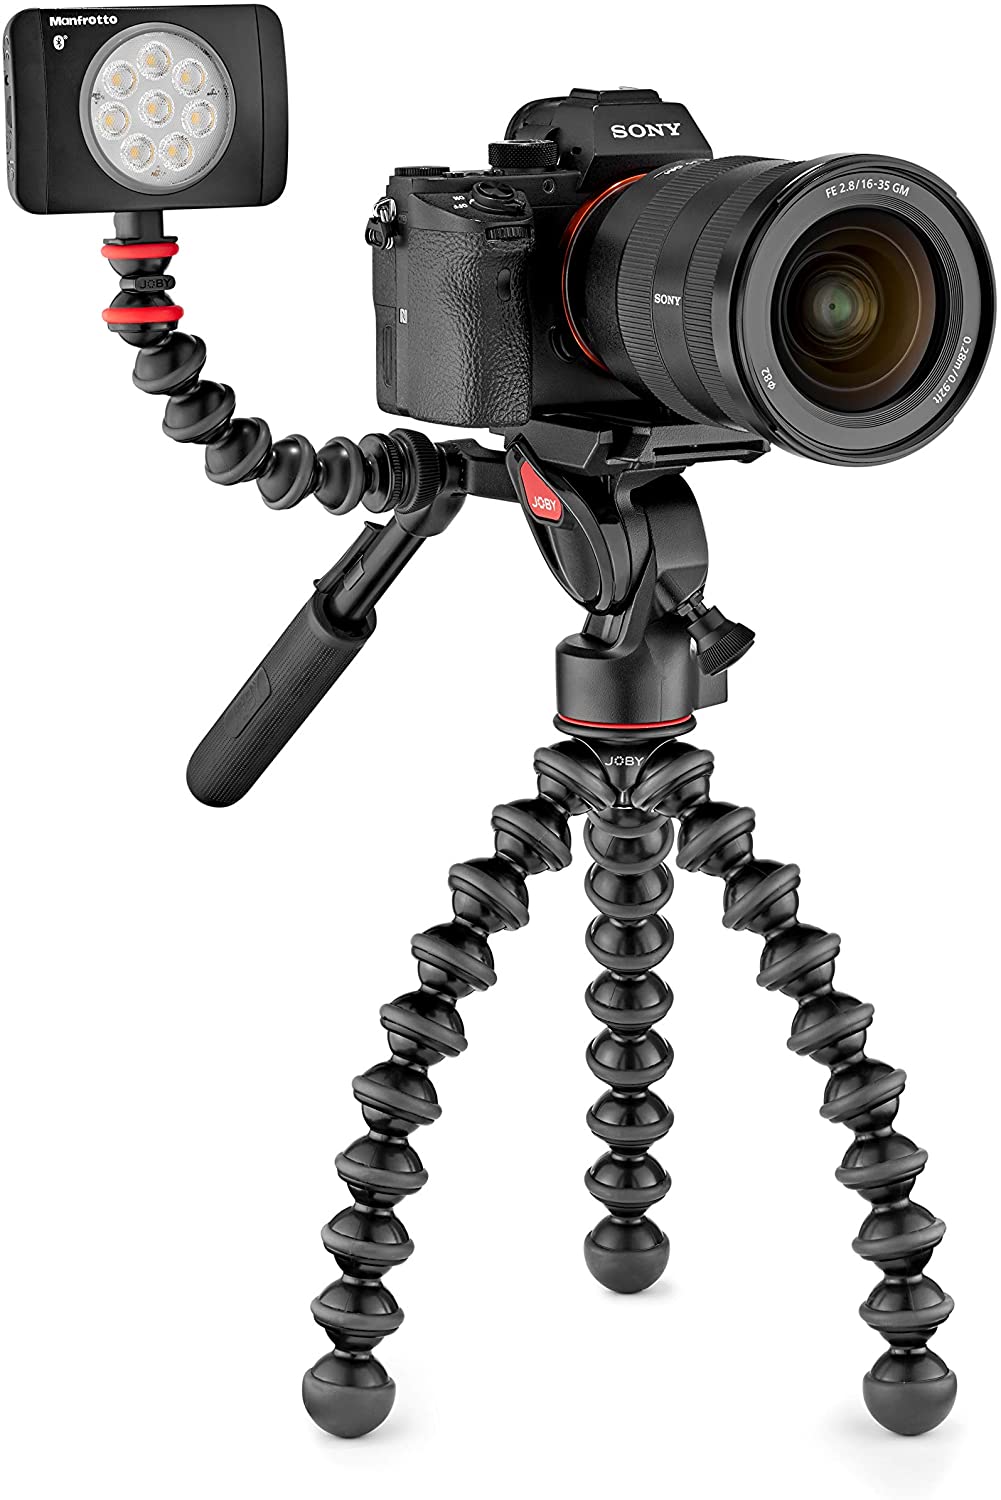 Joby GorillaPod 3K Video PRO Professional Video Head Kit Camera Tripod Stand with Smooth Pan and Tilt Movements for DSLR and Mirrorless Camera